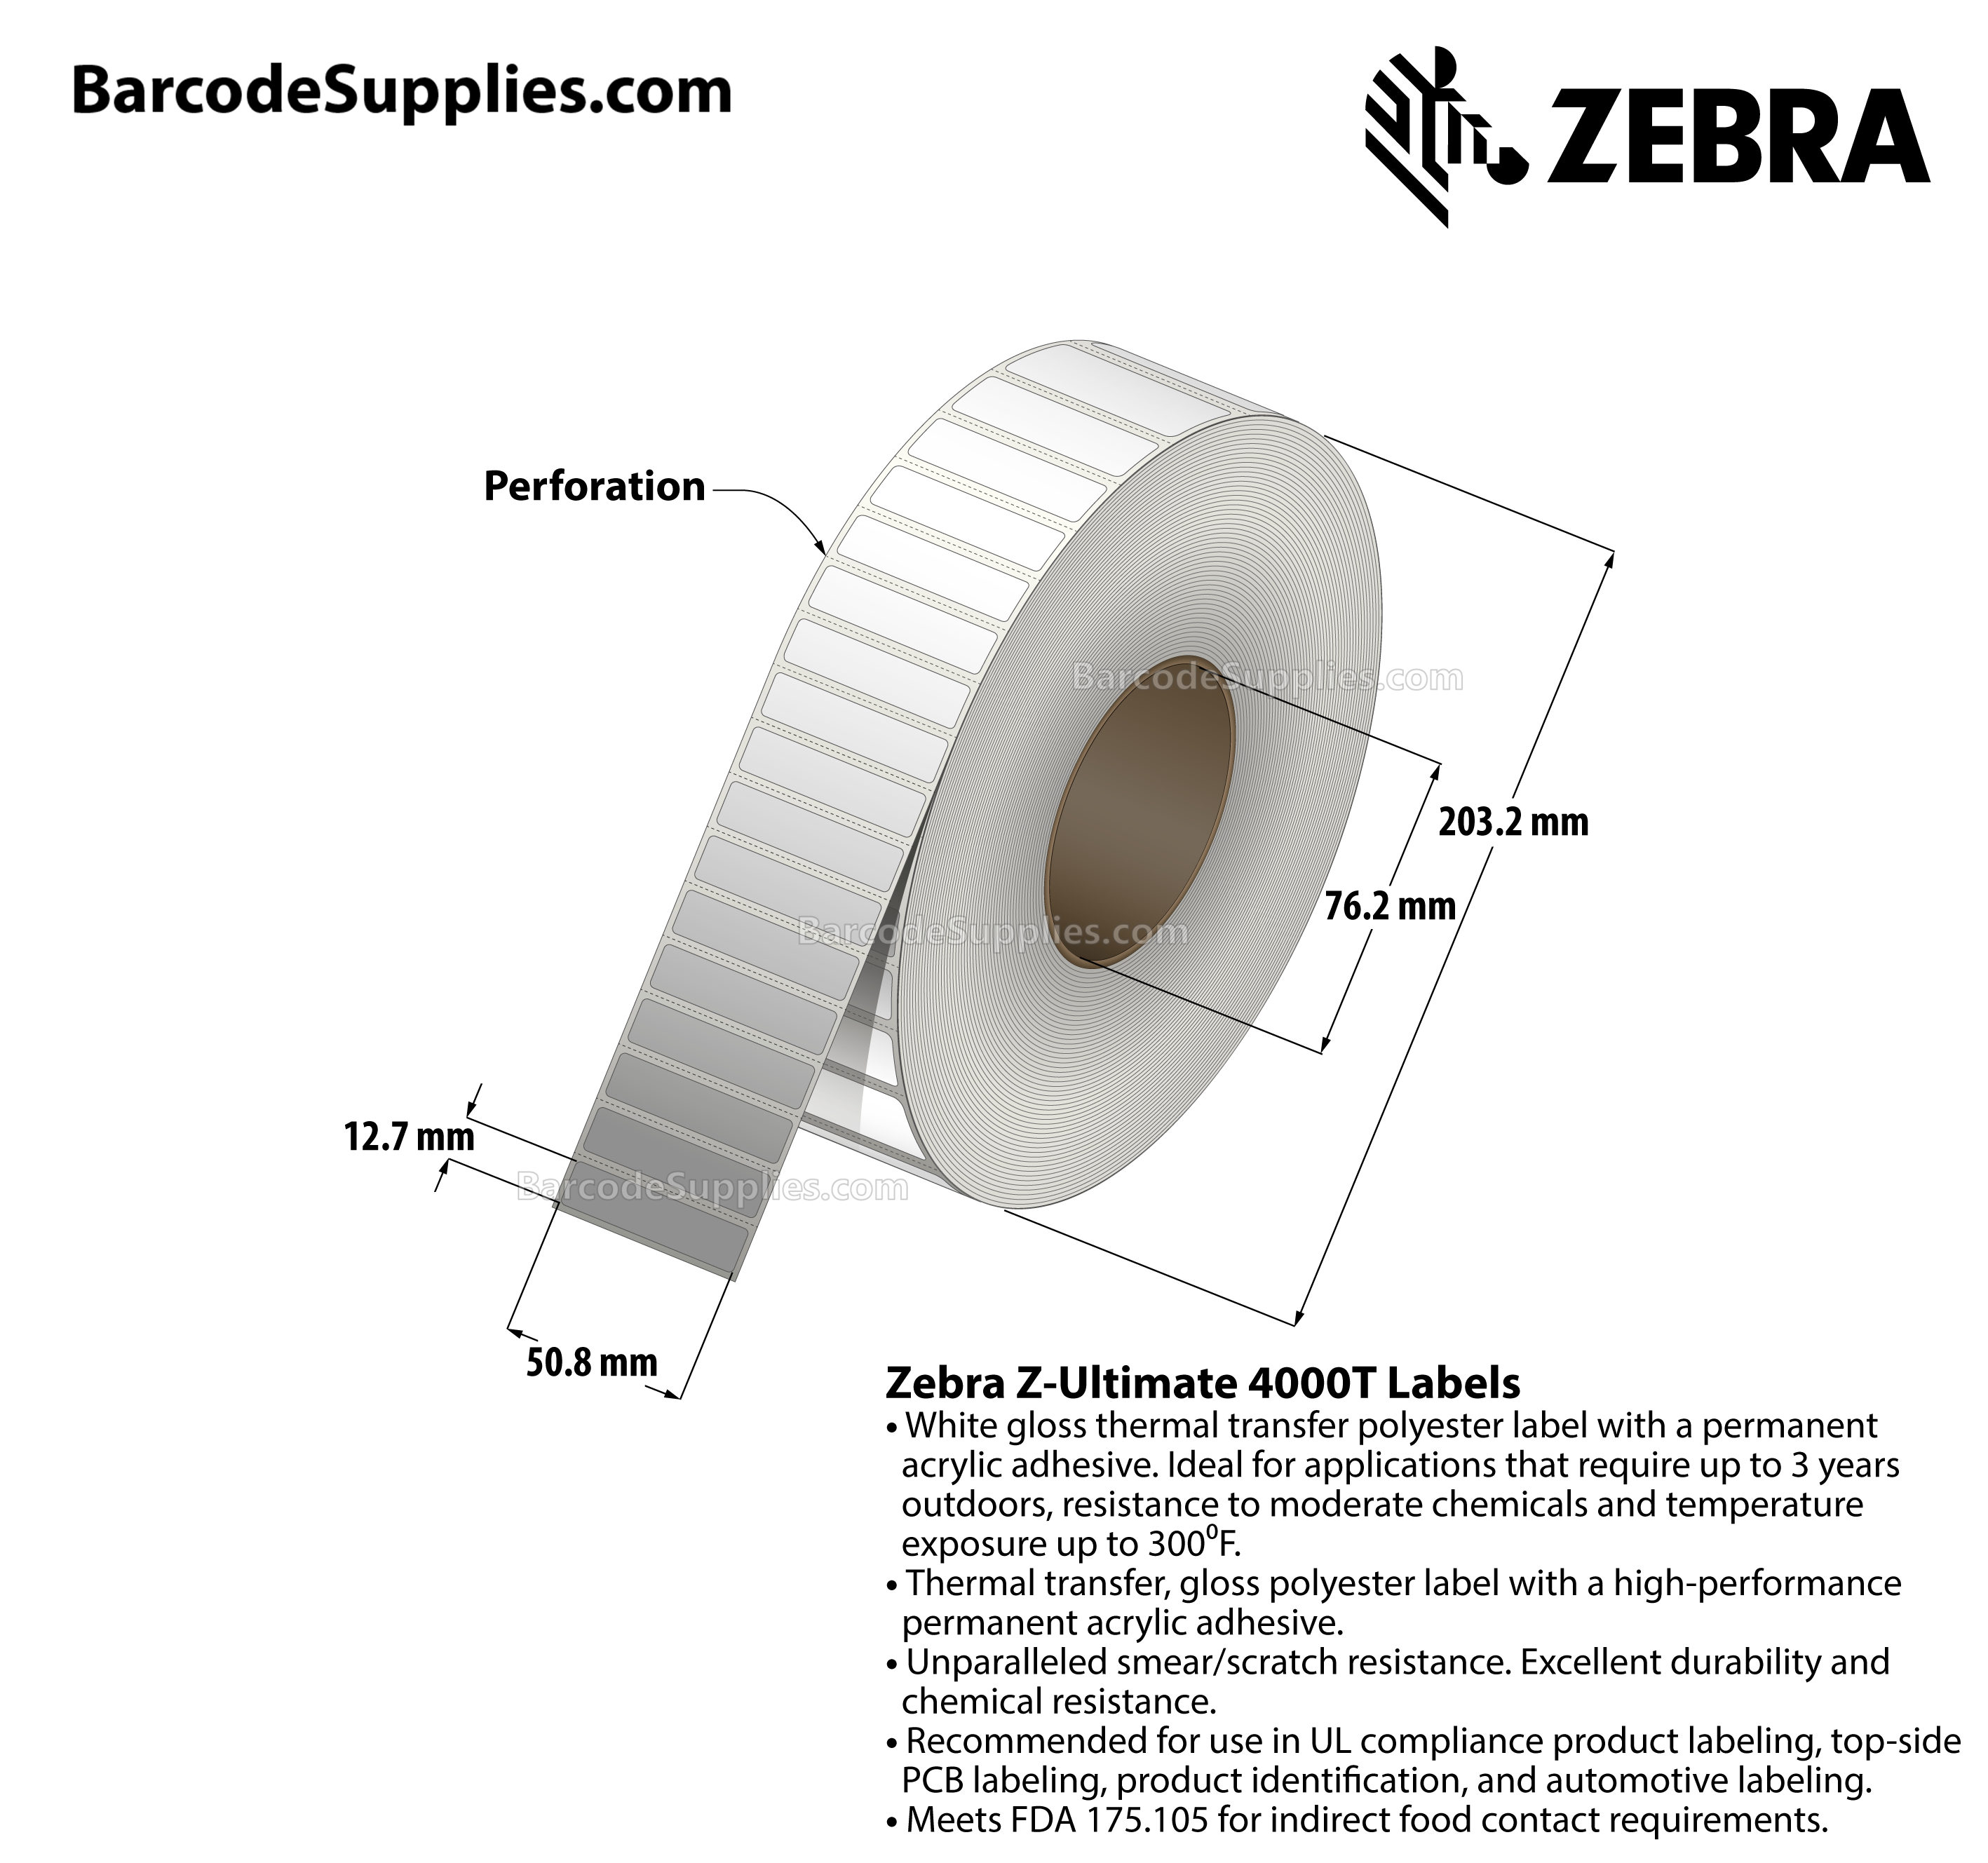 2 x 0.5 Thermal Transfer White Z-Ultimate 4000T Labels With Permanent Adhesive - Perforated - 10000 Labels Per Roll - Carton Of 4 Rolls - 40000 Labels Total - MPN: 10011707